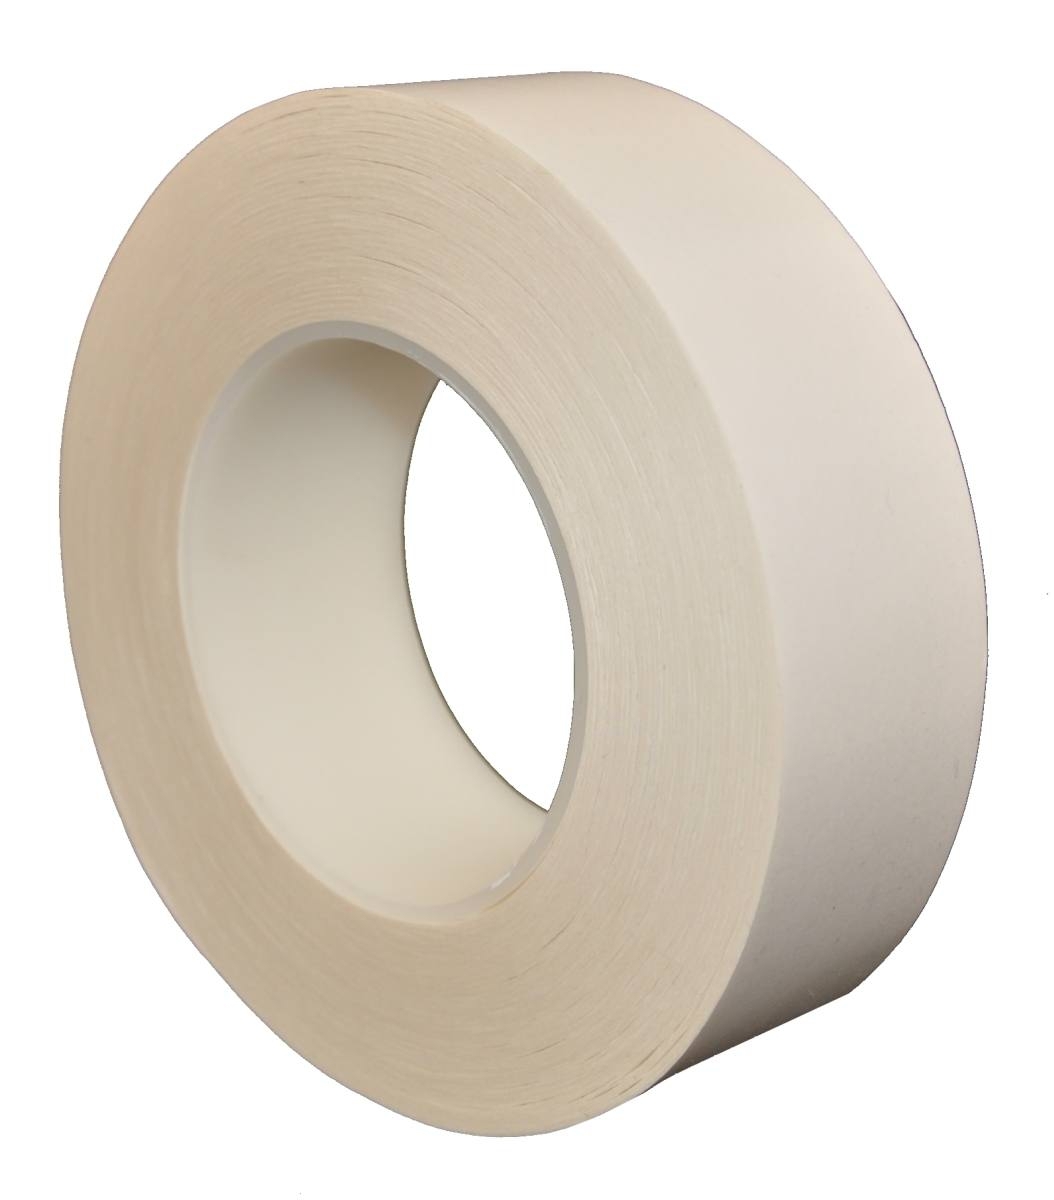 SKS silicone paper release liner, 50mmx150m, coated with glassine on both sides, white